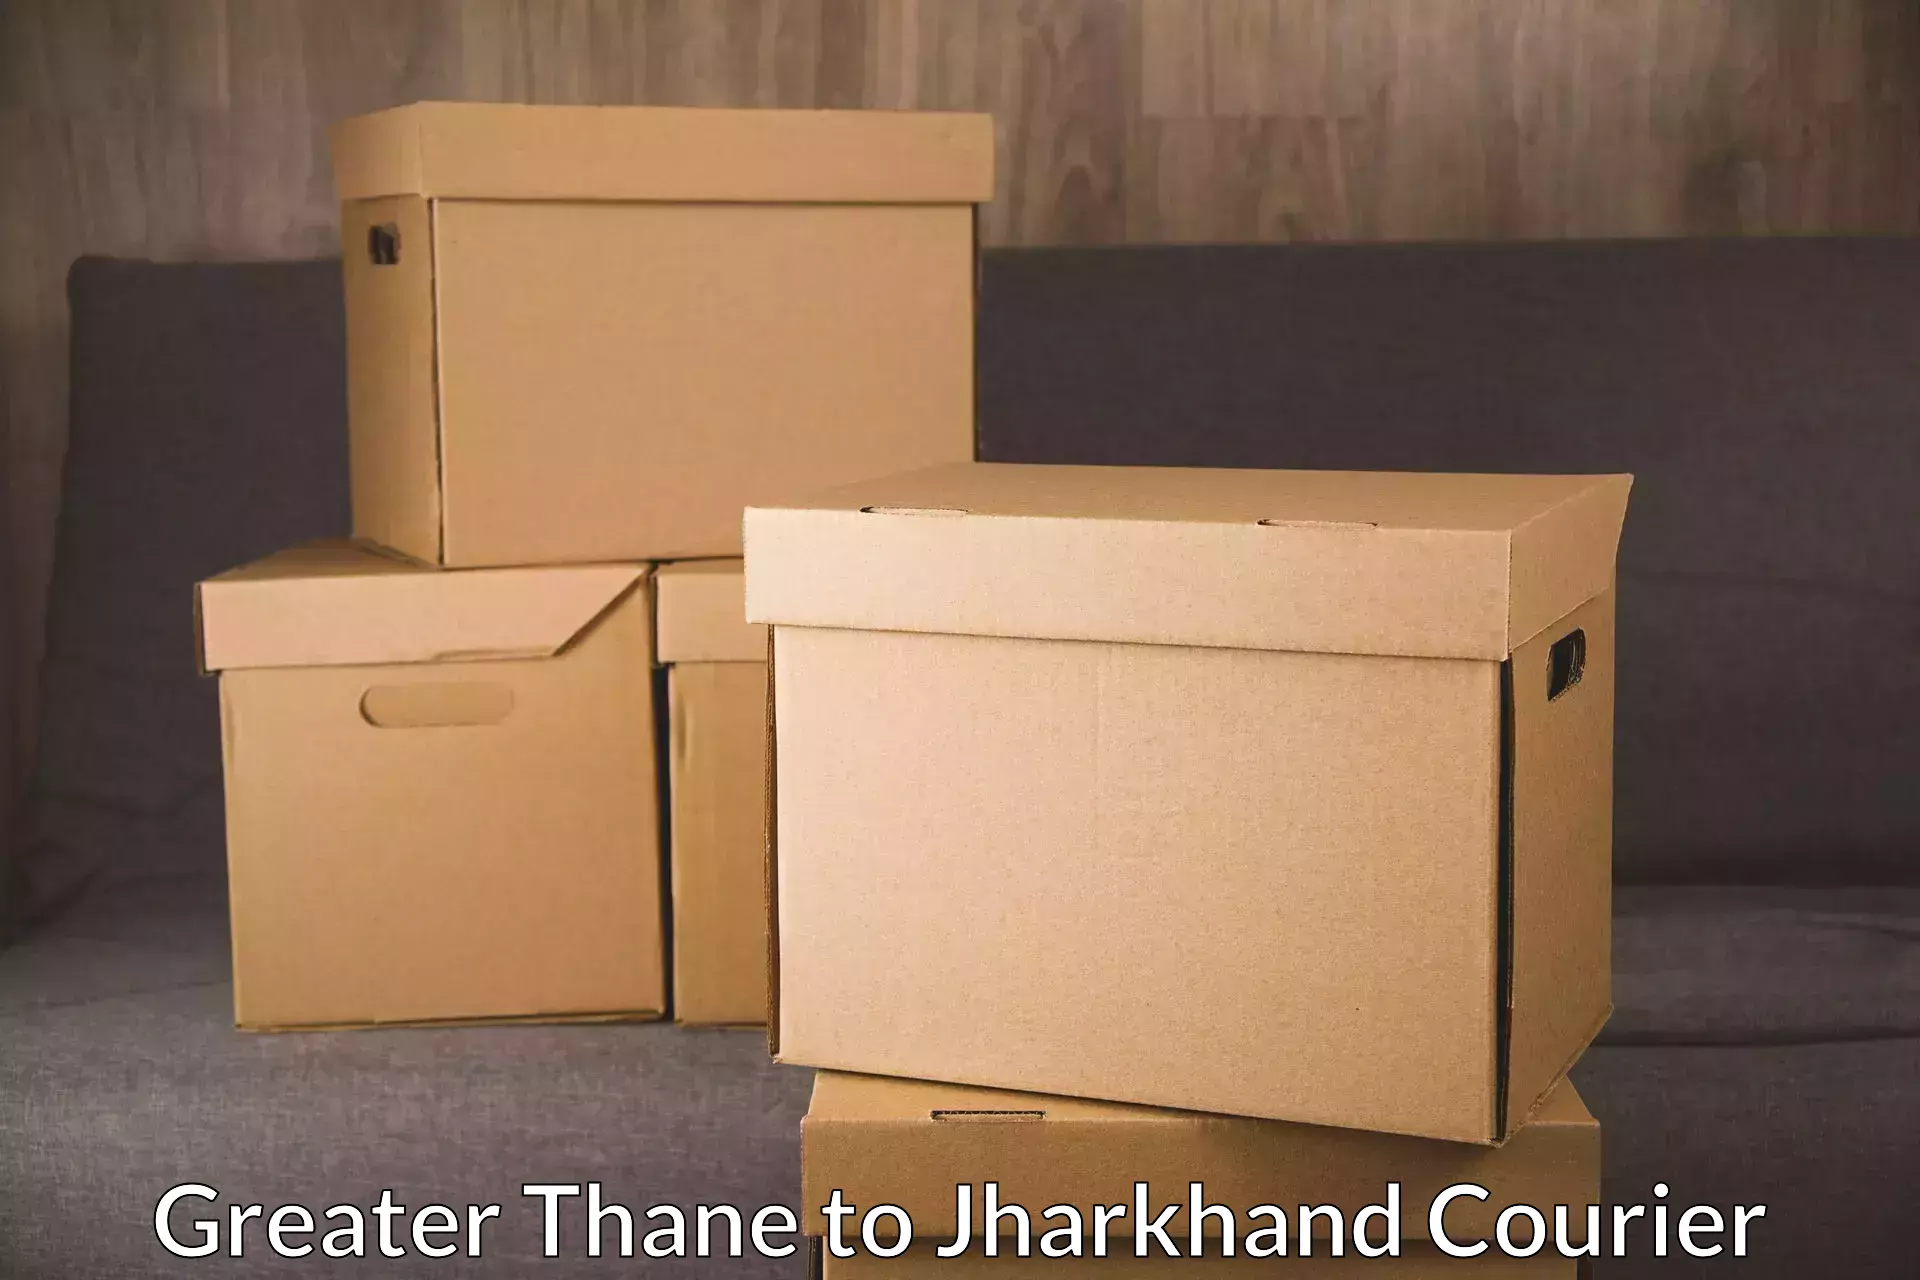 Logistics service provider Greater Thane to Jharkhand